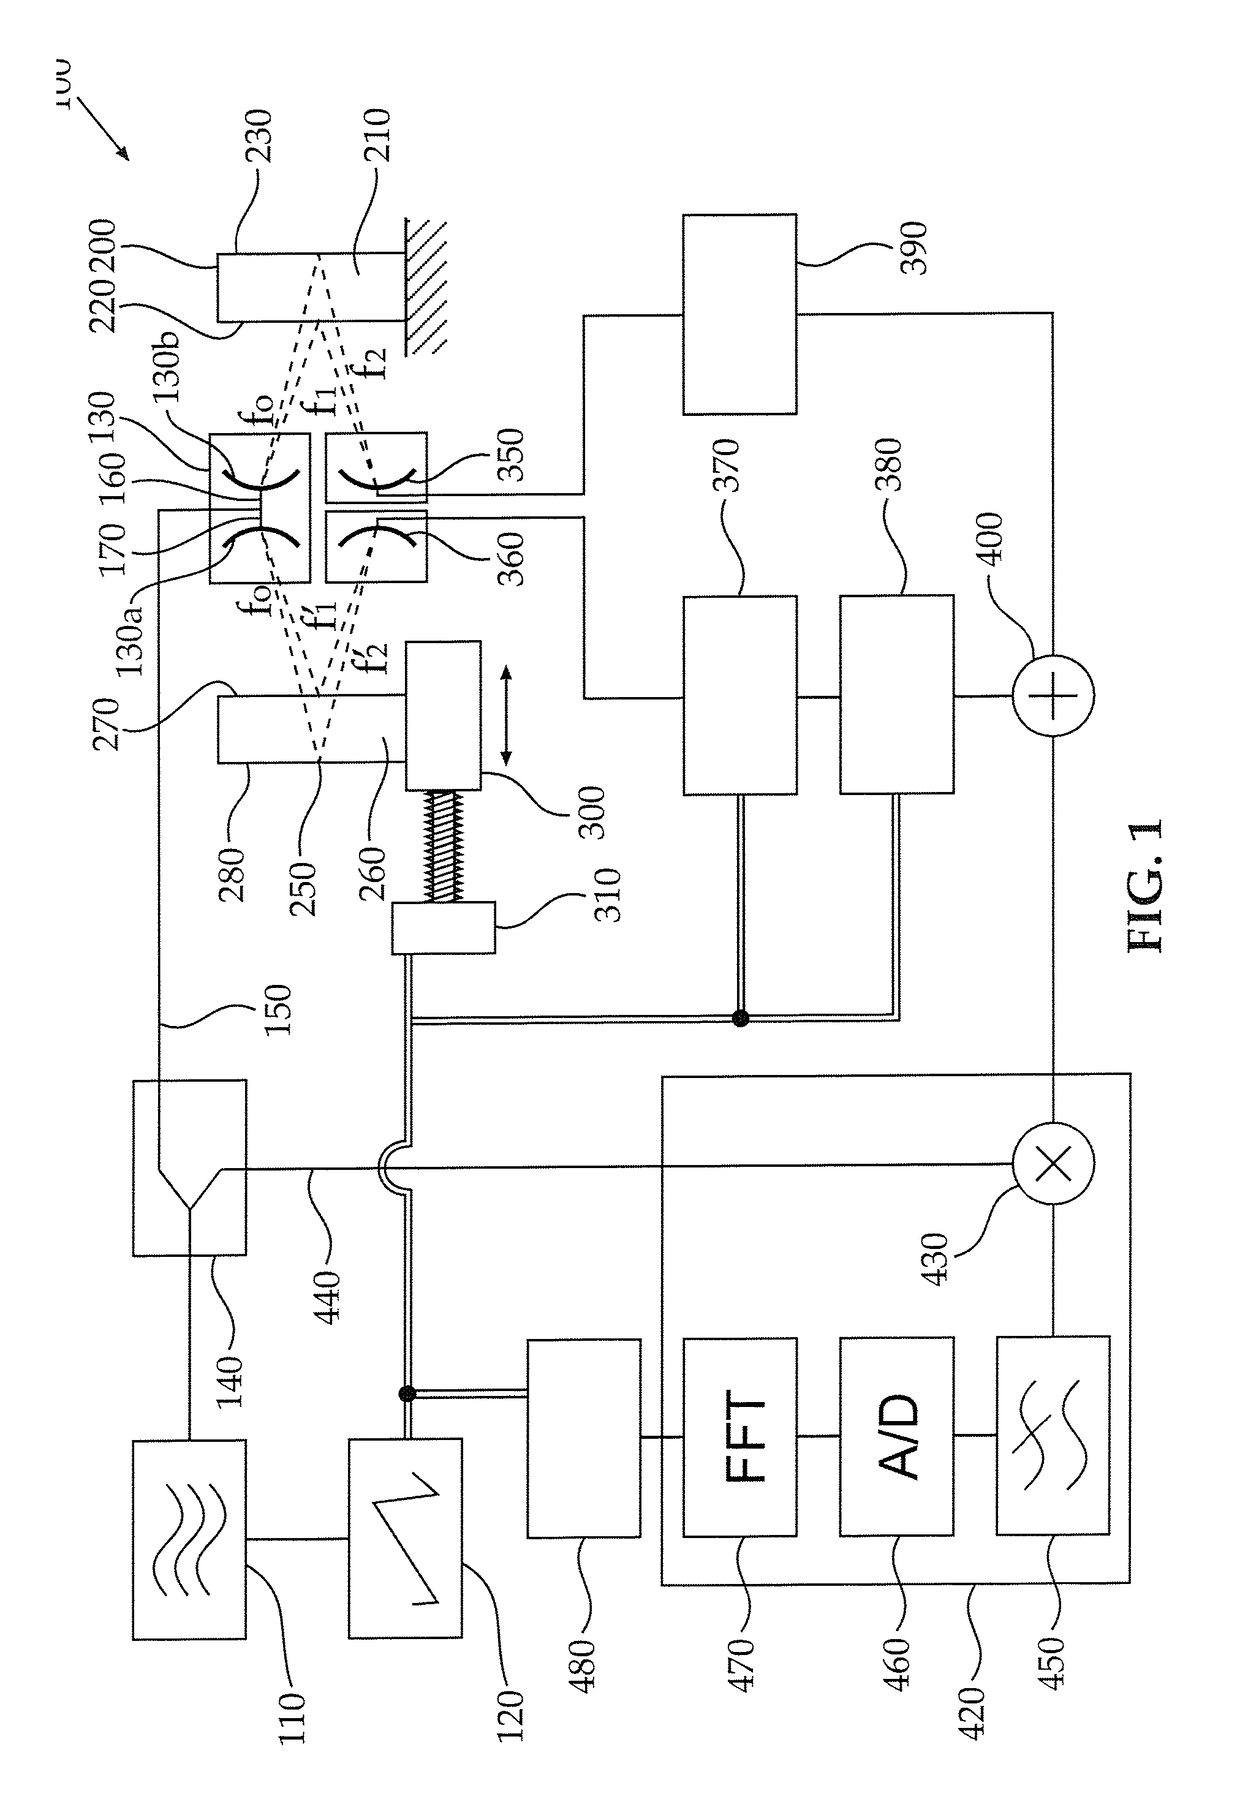 Emcw layer thickness measurement apparatus and method